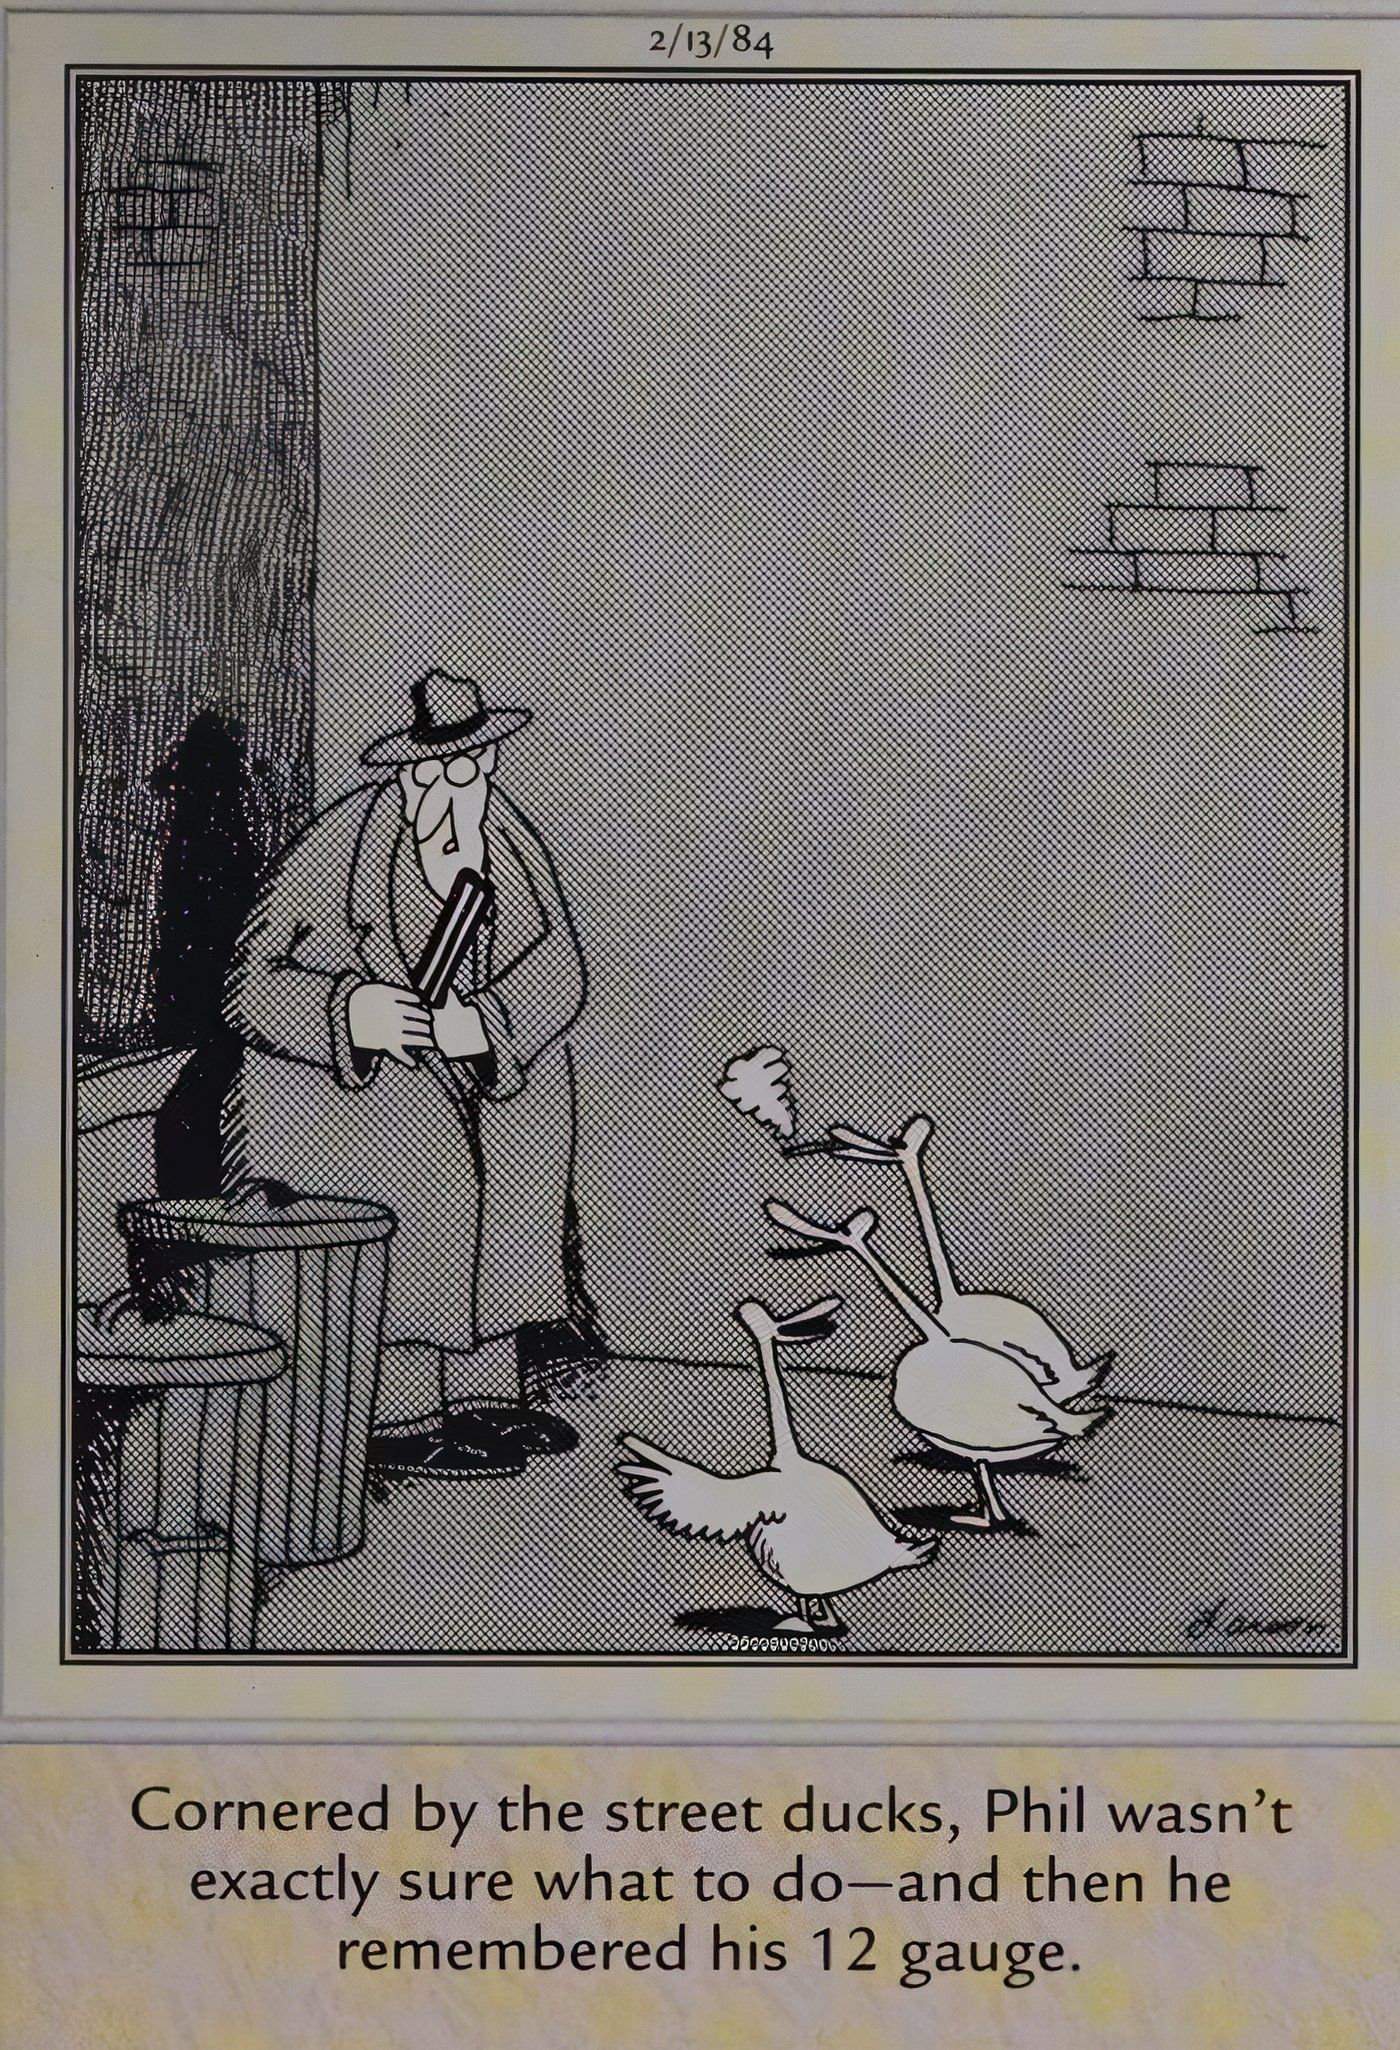 Far Side, man cornered by ducks in an alleyway reaches for shotgun in his trenchcoat